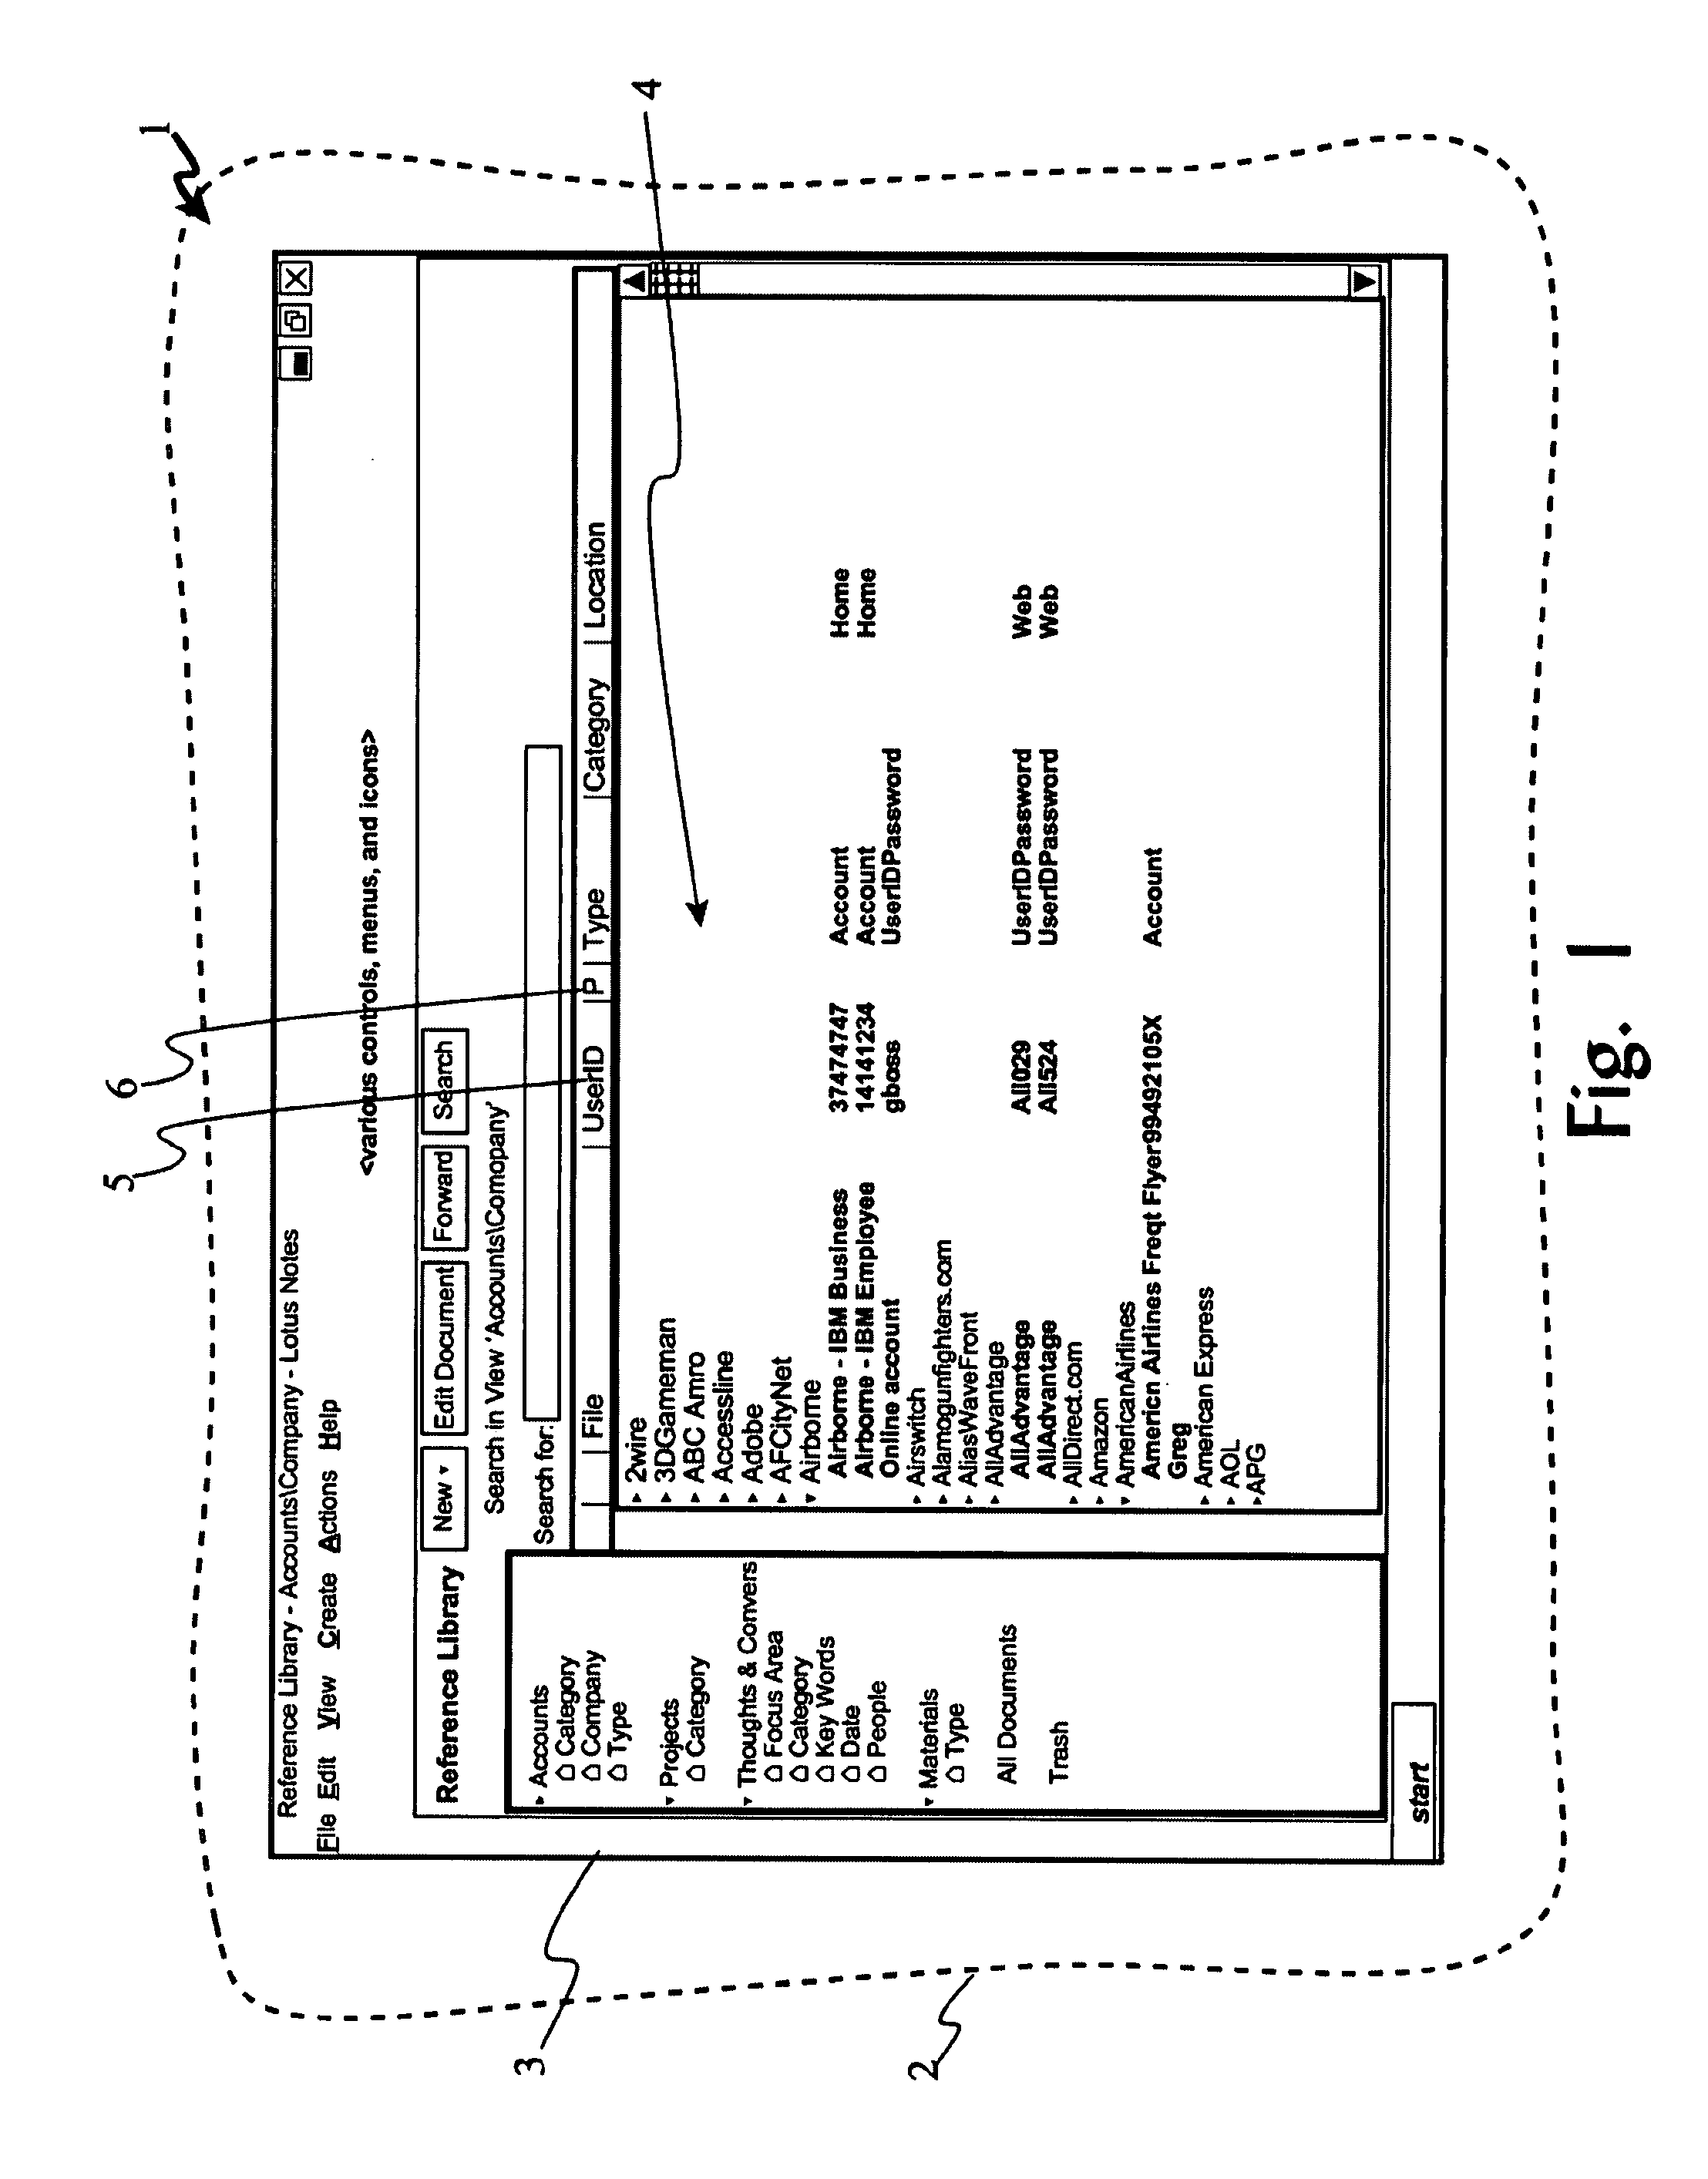 System and Method to Capture and Manage Input Values for Automatic Form Fill